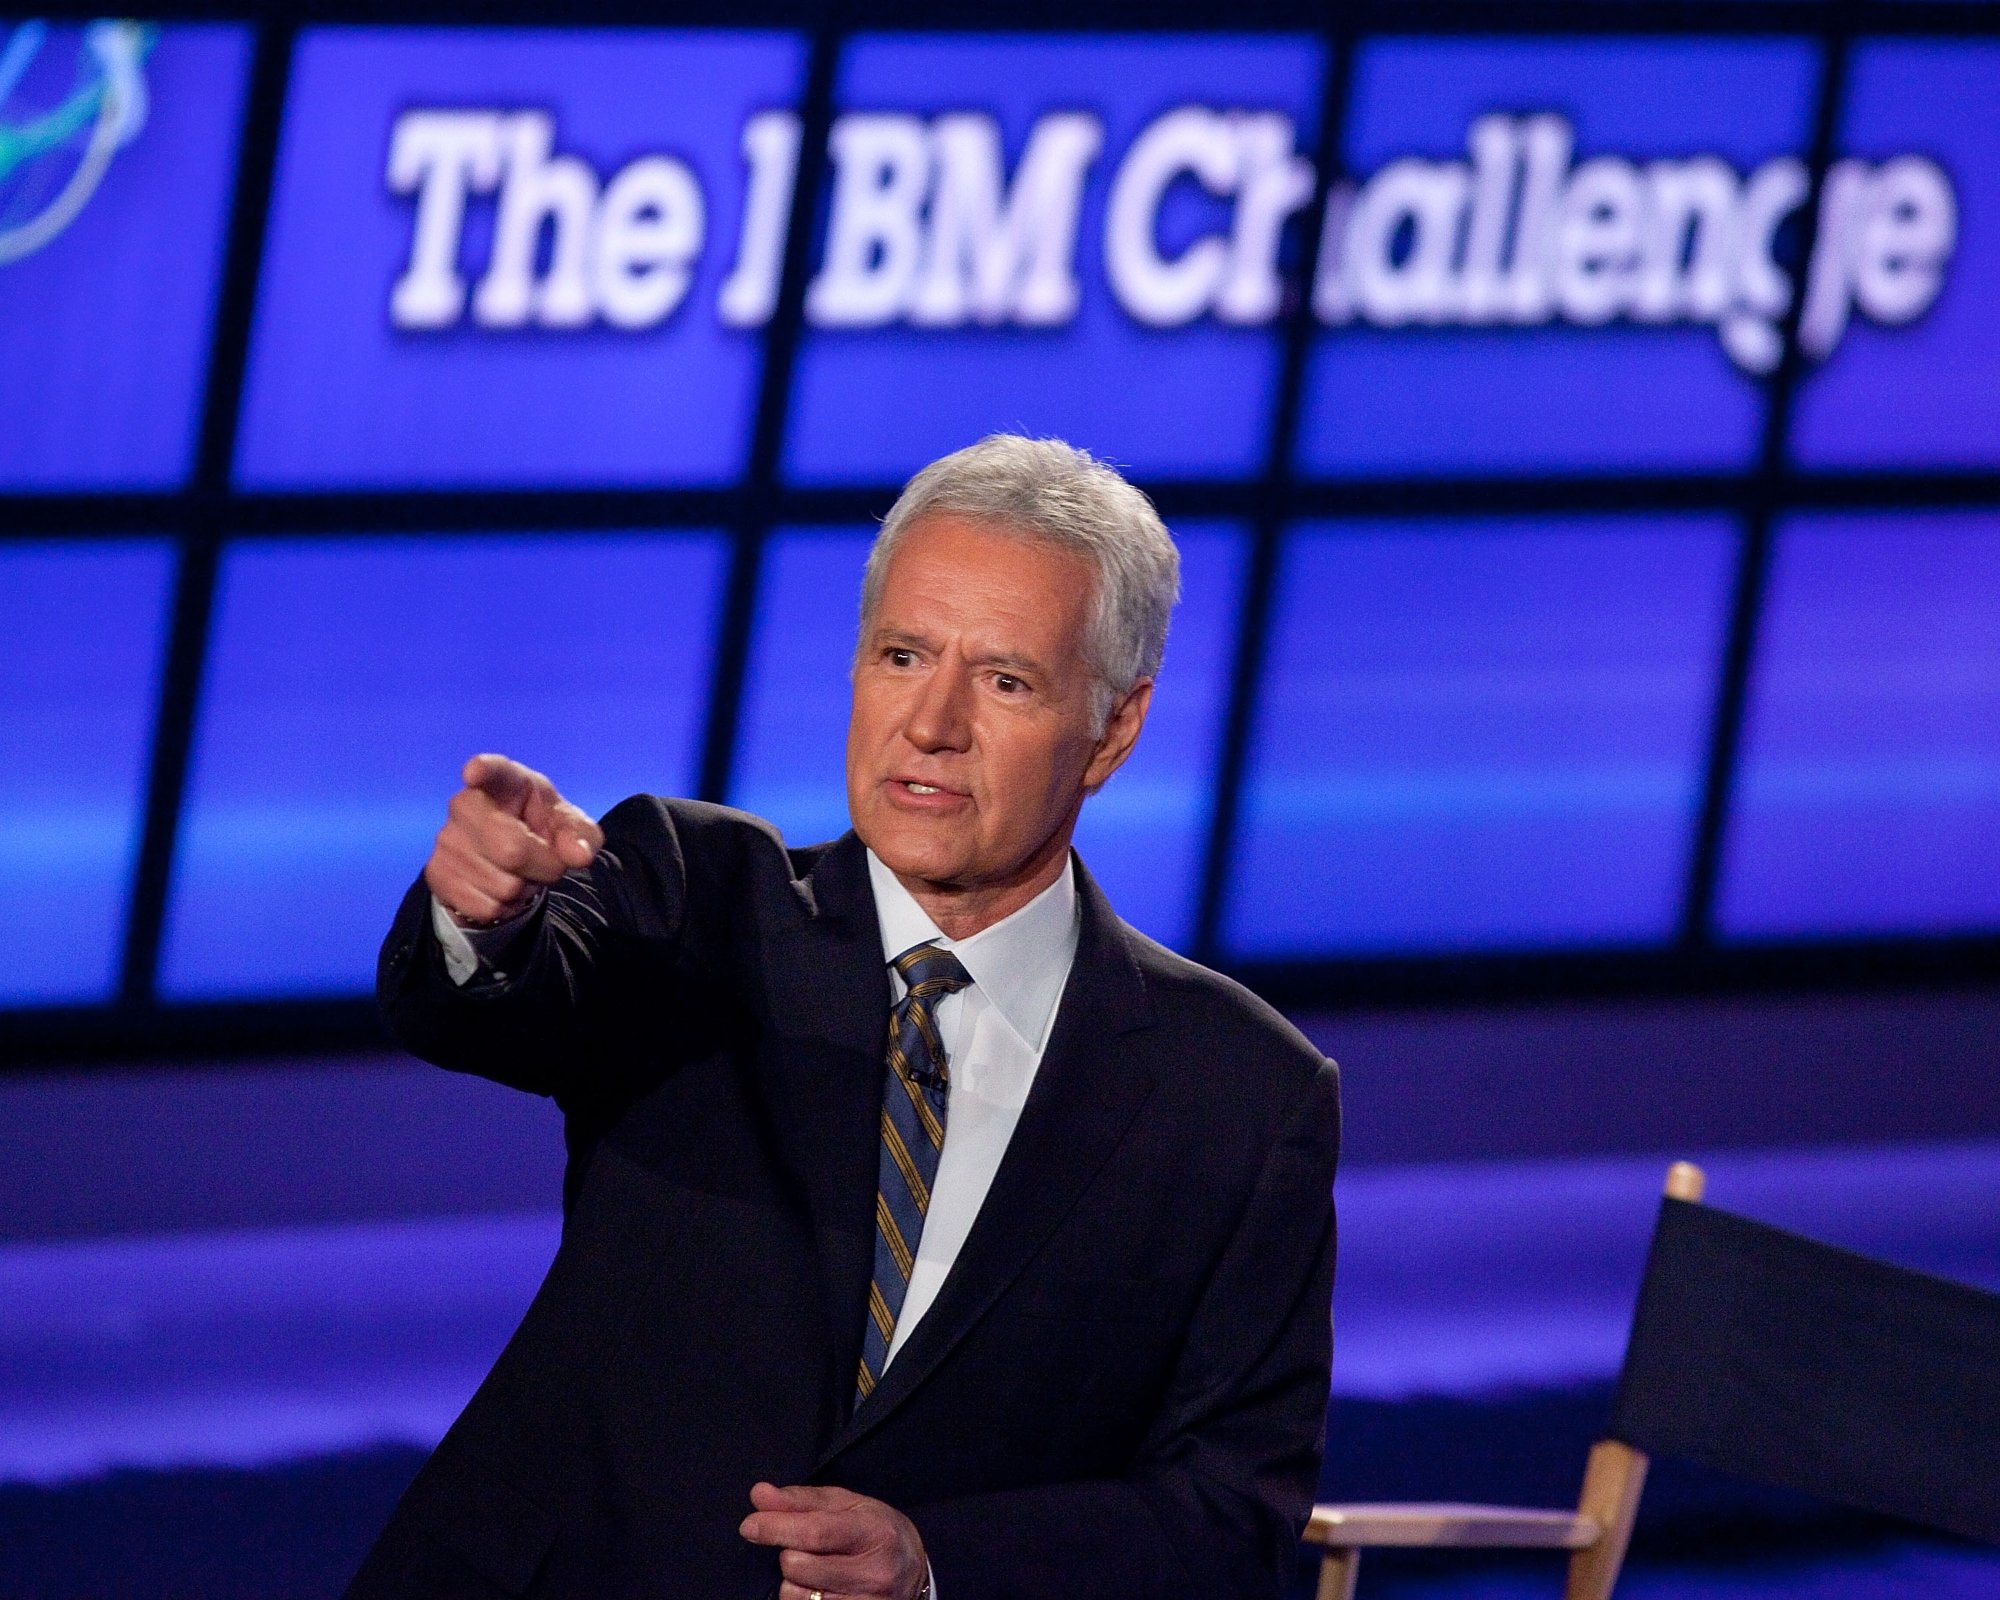 'Jeopardy! Alex Trebek, who enforced the most sacred rule. He's holding out his finger, pointing, while wearing a suit in front of blue screens.